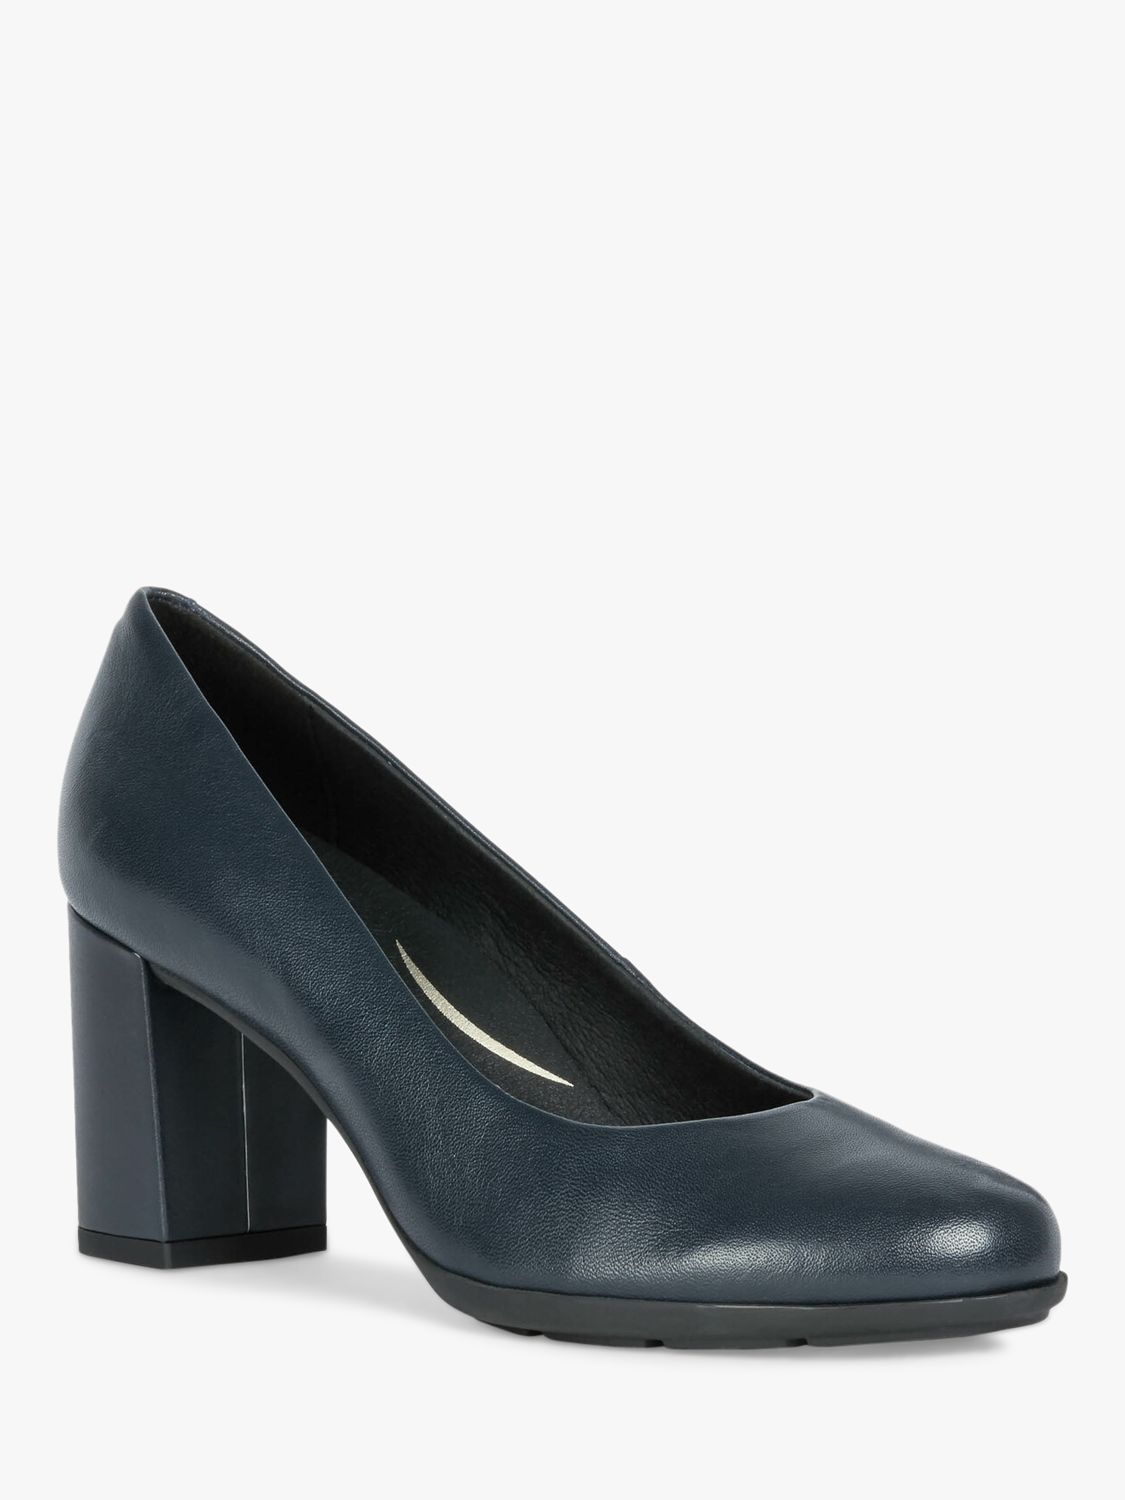 Geox Annya Leather Block Heel Court Shoes, Navy at John Lewis & Partners